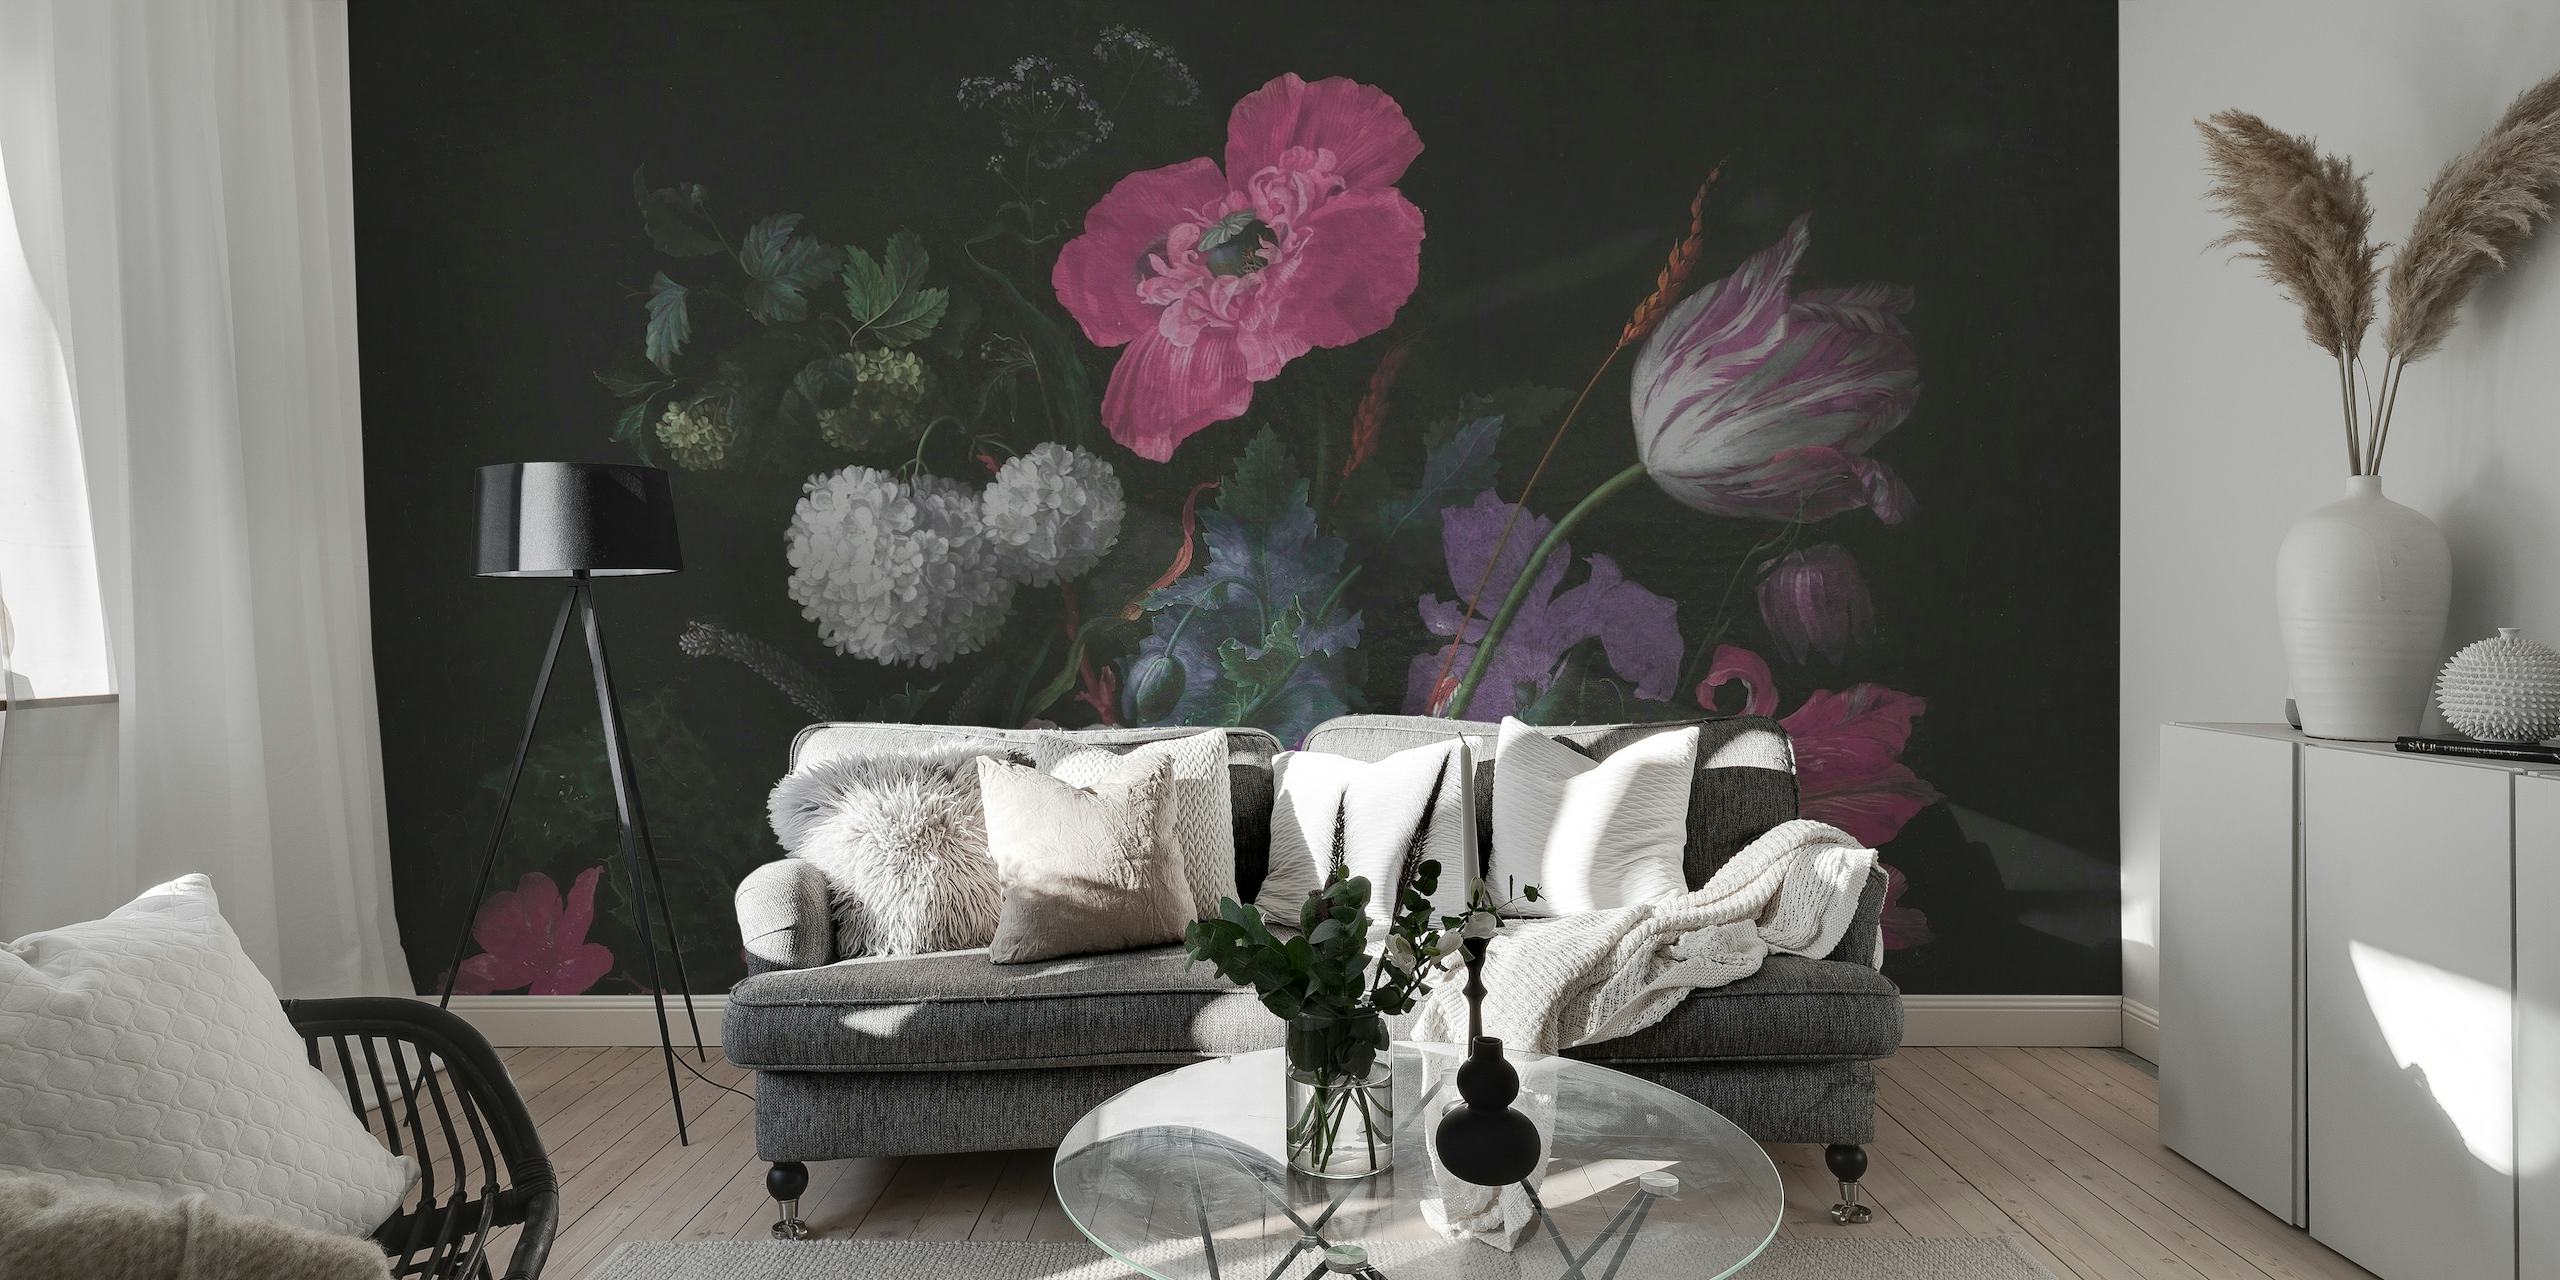 Dark and moody floral wallpaper featuring pink flowers on a black background